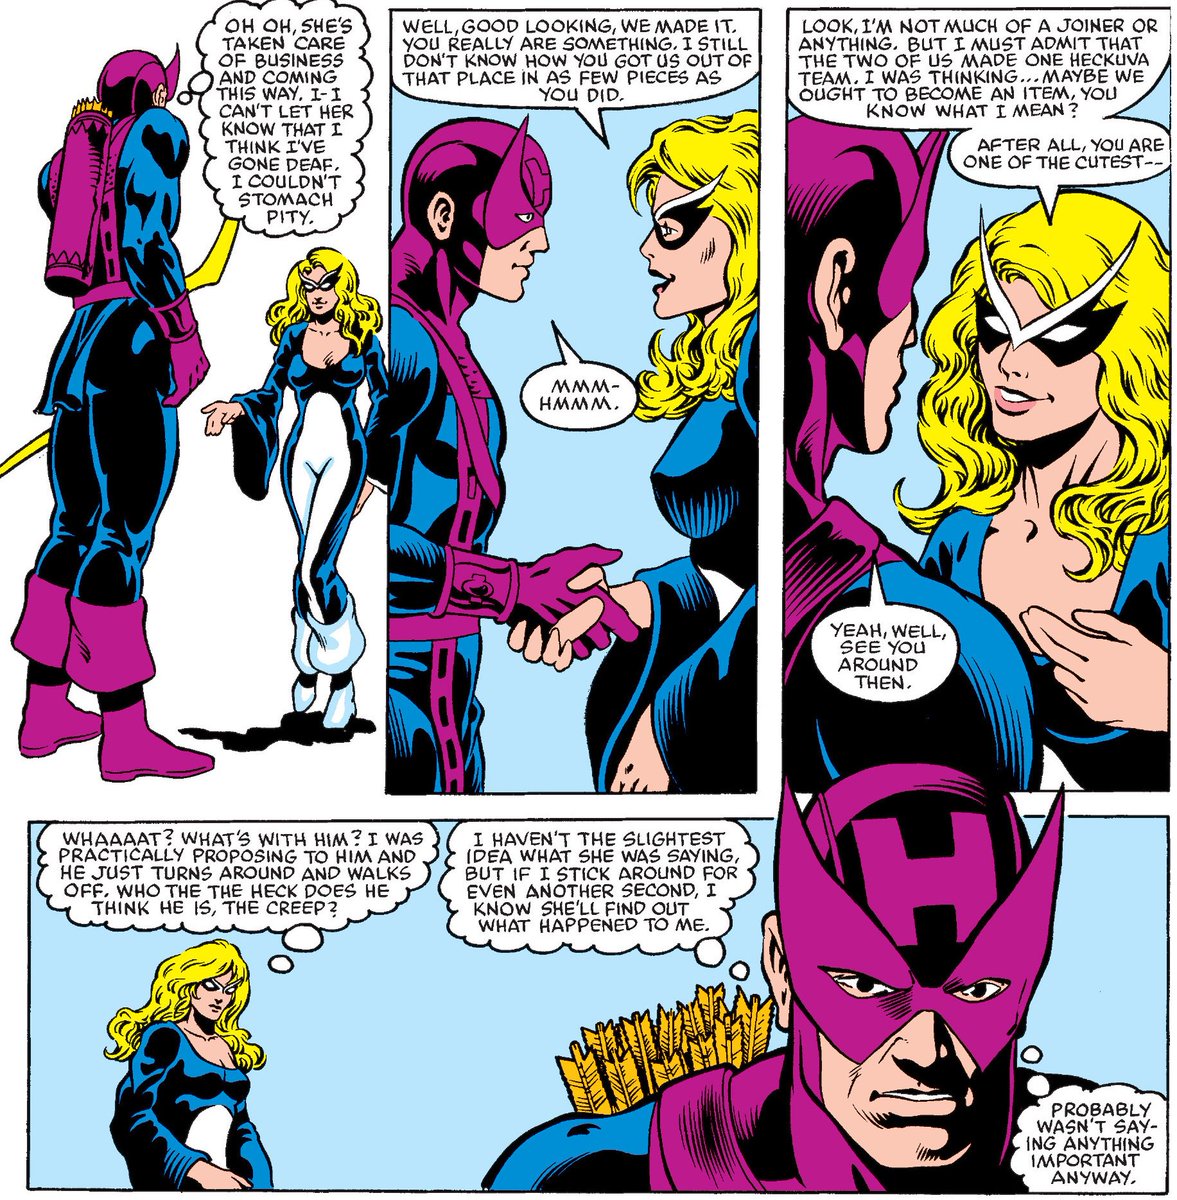 This almost prevented his relationship with Mockingbird to happen, as you can see bellow, but she caught up with him.